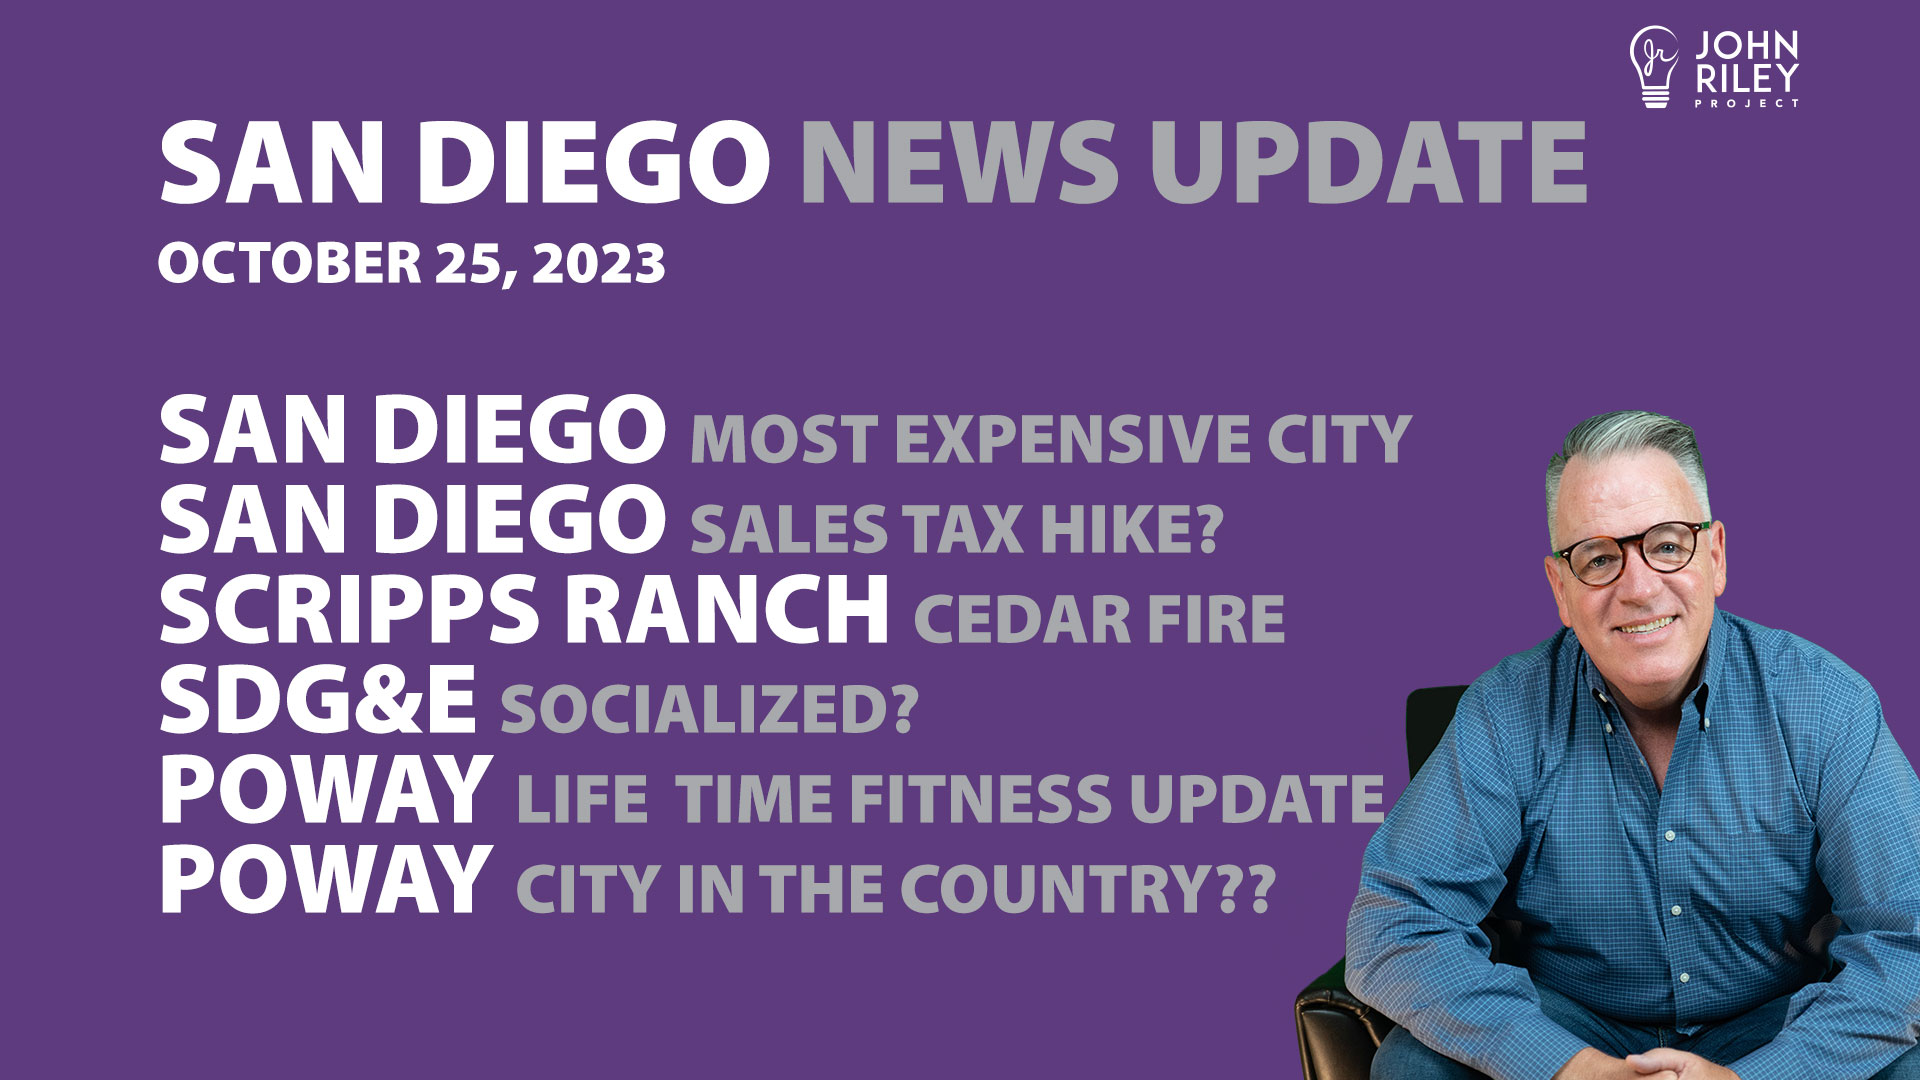 John Riley discusses San Diego Most Expensive City in USA, San Diego Sales Tax Hike?, Govt takeover of SDGE?, Poway News